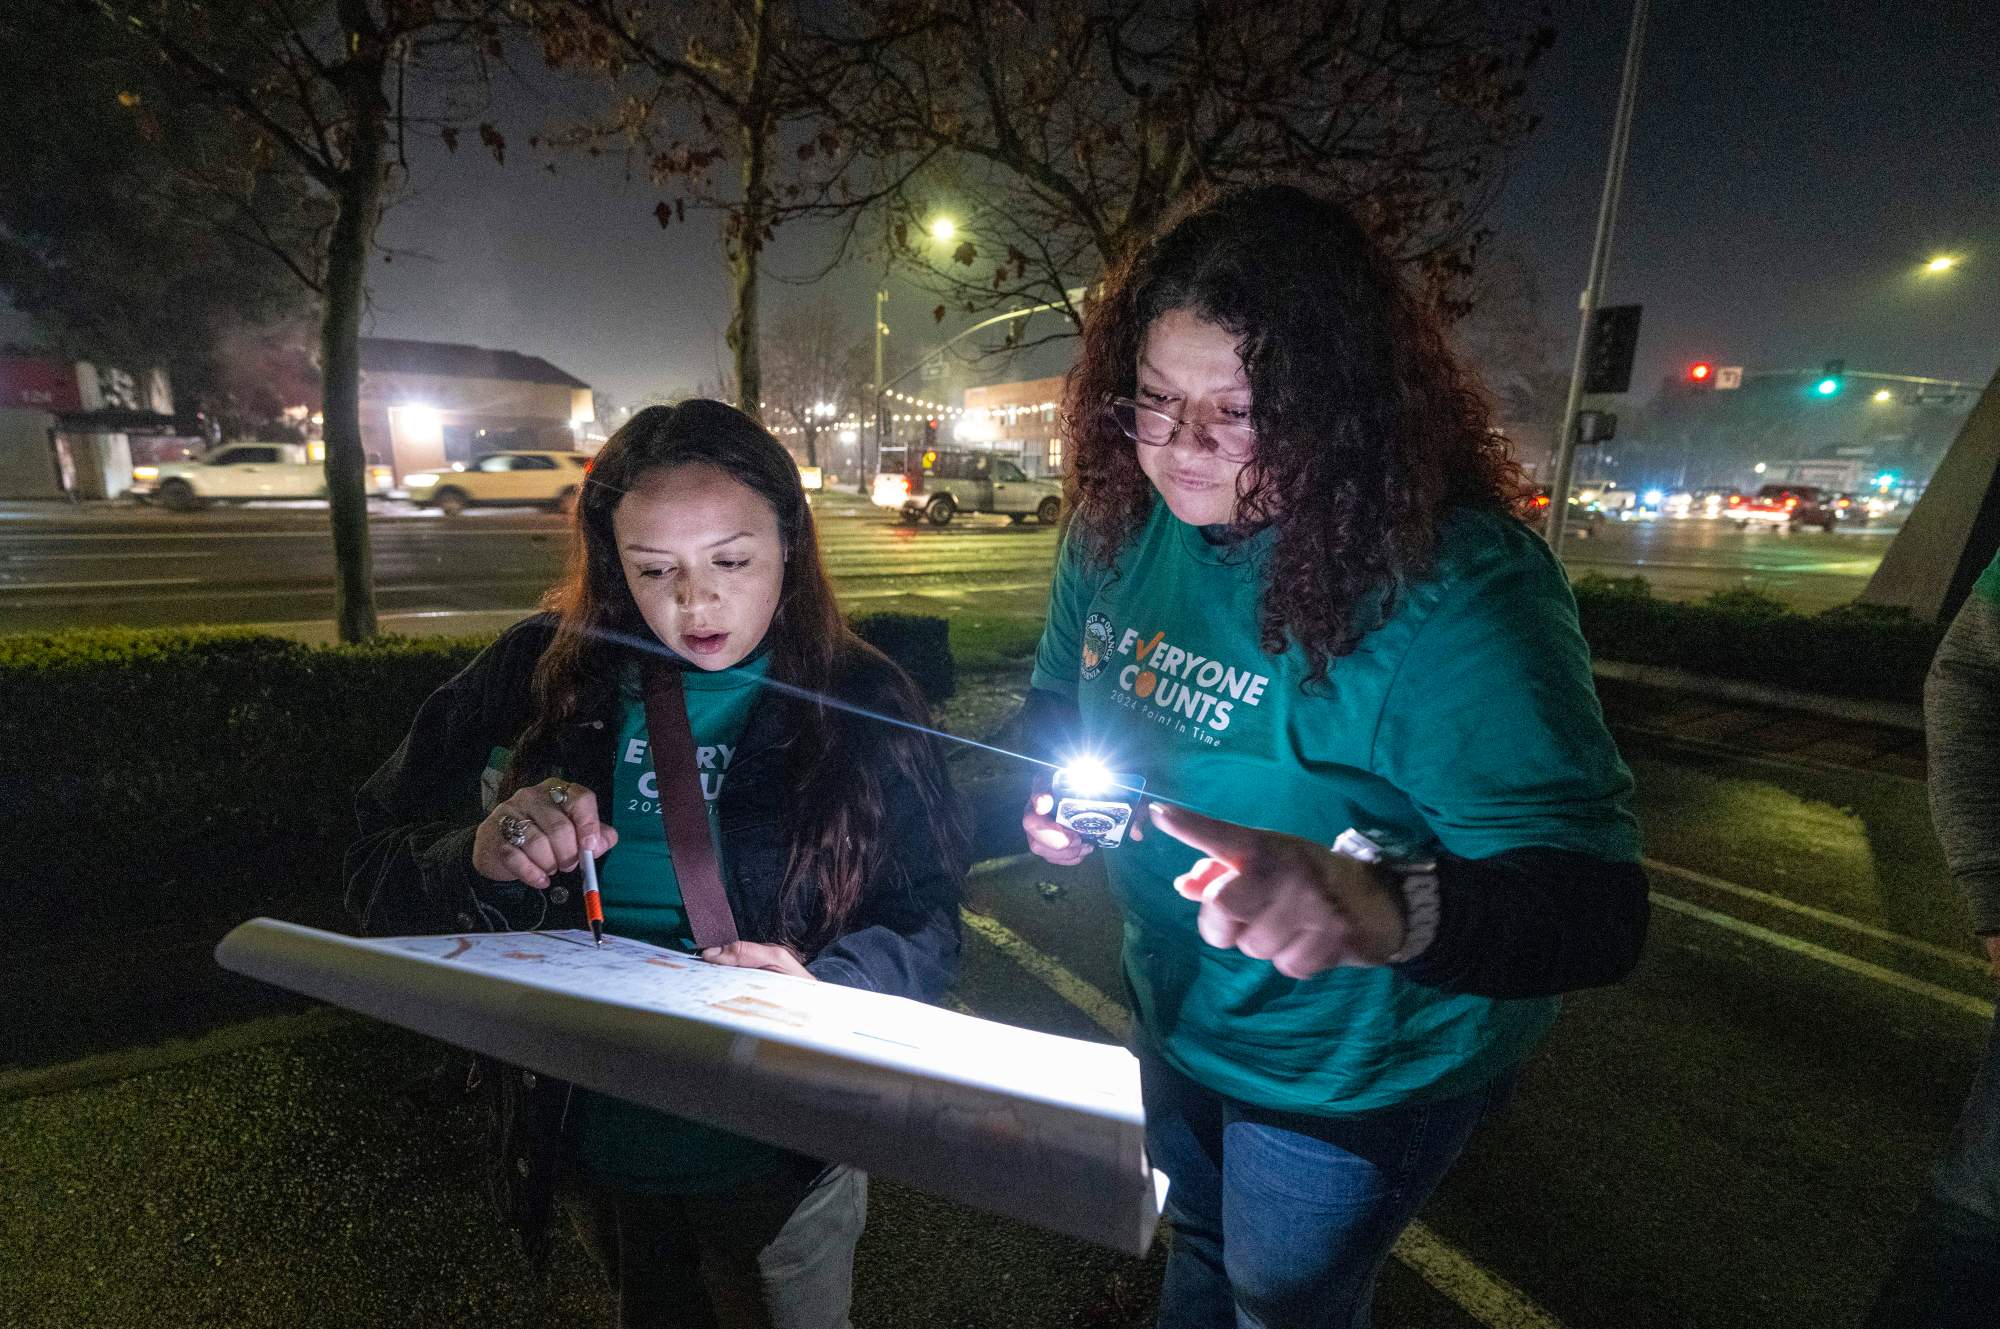 After speaking with a nearby homeless individual, volunteers Katherine Ibarra, left, of the Garden Grove Regional Center and Yolie Negrete, right, a program supervisor at City Net, check their map on where to go next as they stand in a parking lot on First Street in downtown Santa Ana before dawn on Tuesday morning, Jan. 23, 2024. This week hundreds of volunteers with the Everyone Counts, Point In Time, homeless survey, will gather data throughout Orange County that will help address homeless issues. (Photo by Mark Rightmire, Orange County Register/SCNG)